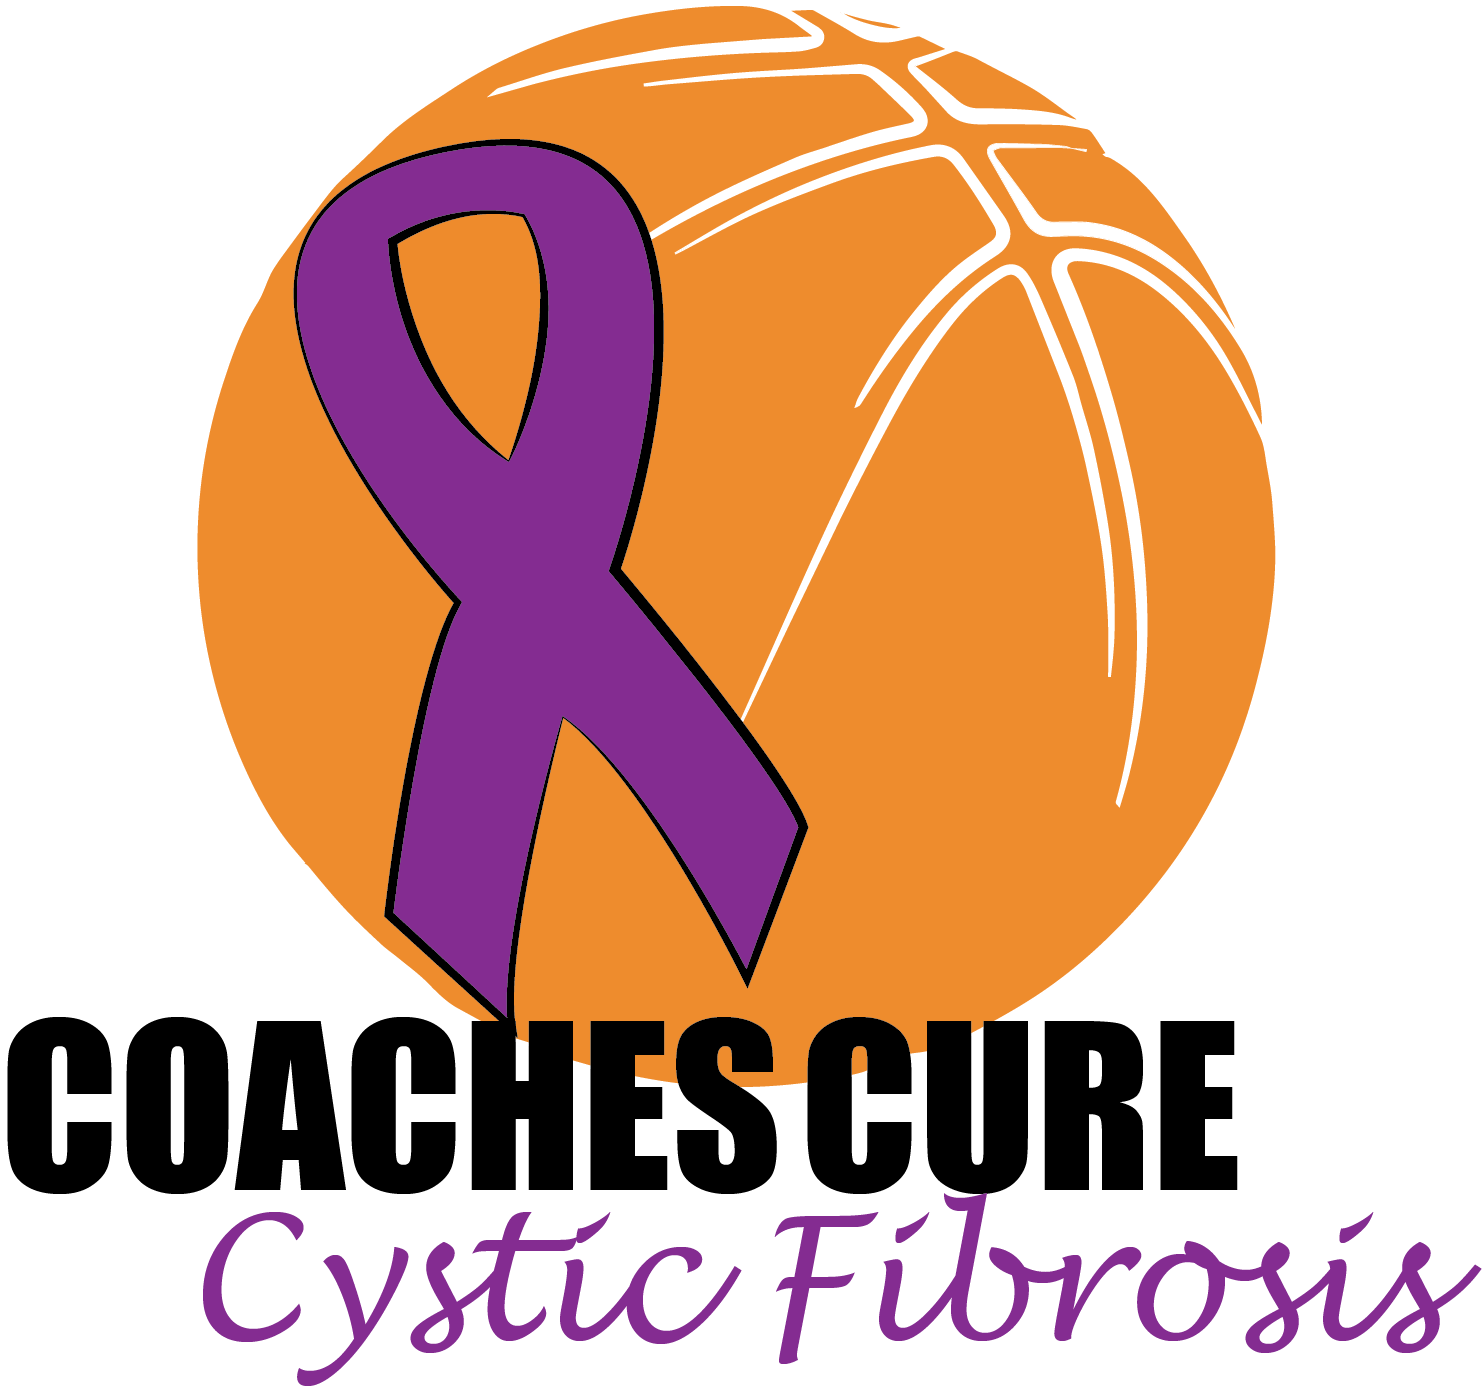 Cf what is Cystic Fibrosis